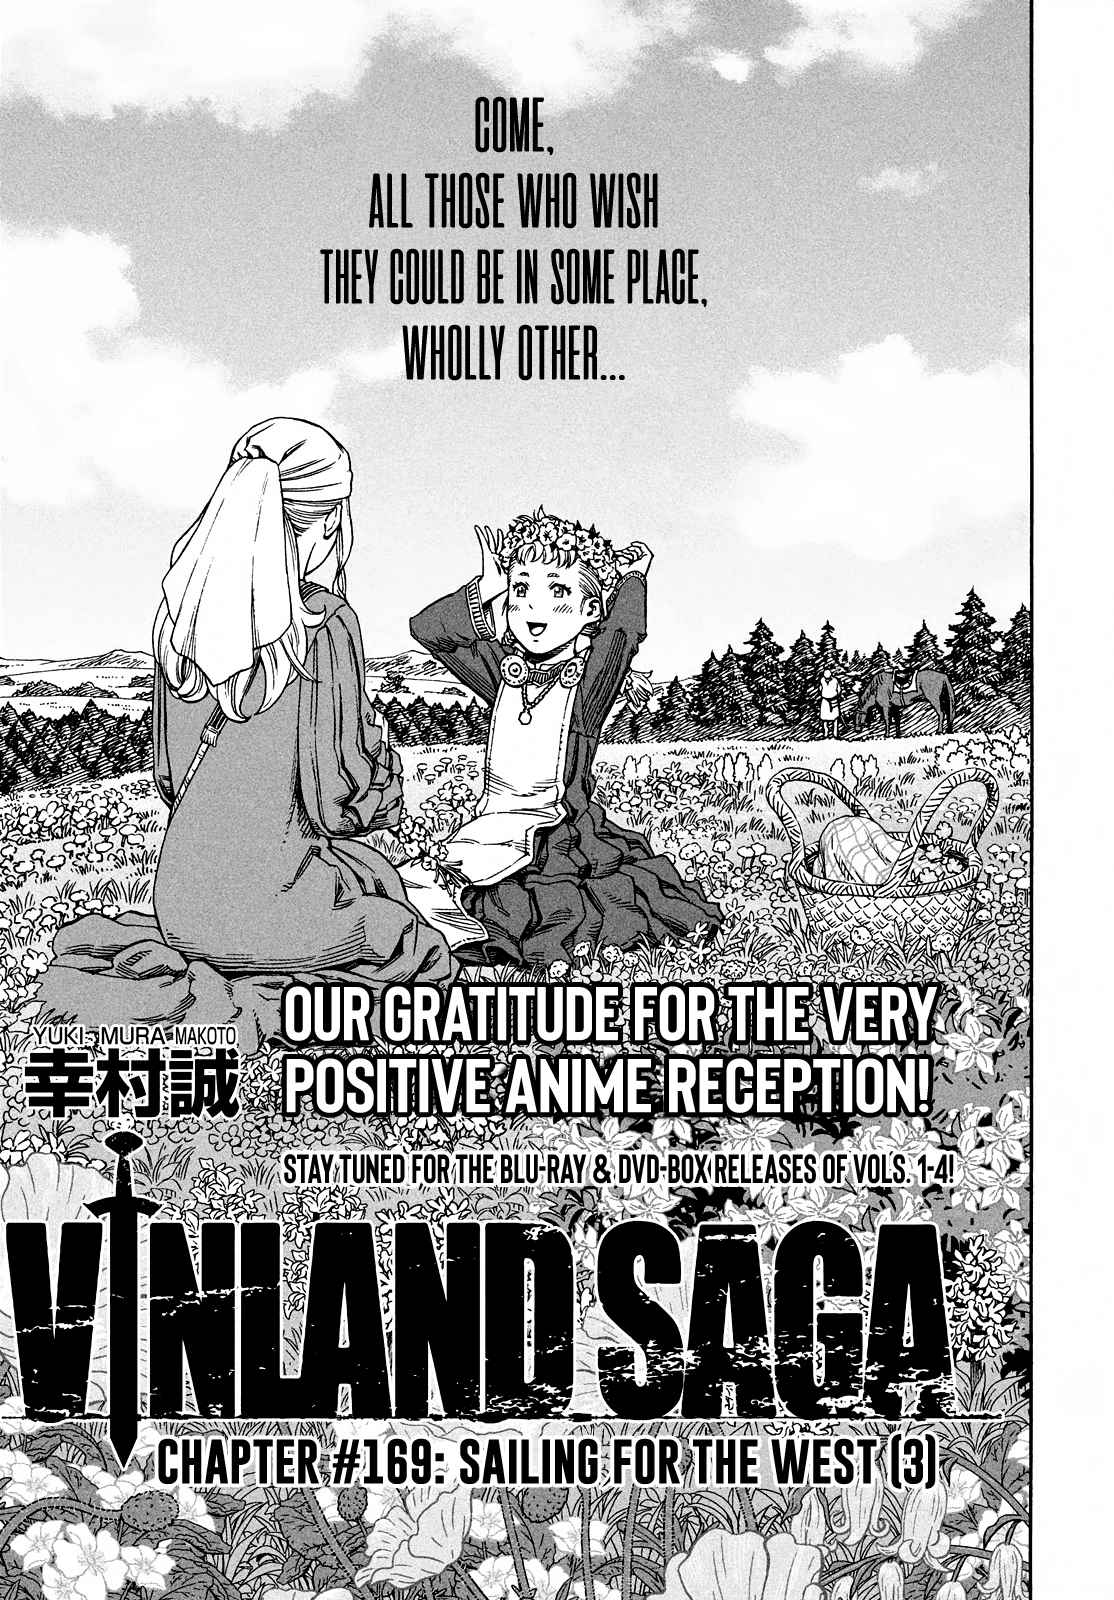 Vinland Saga Ch. 169 Sailing for the West (3)